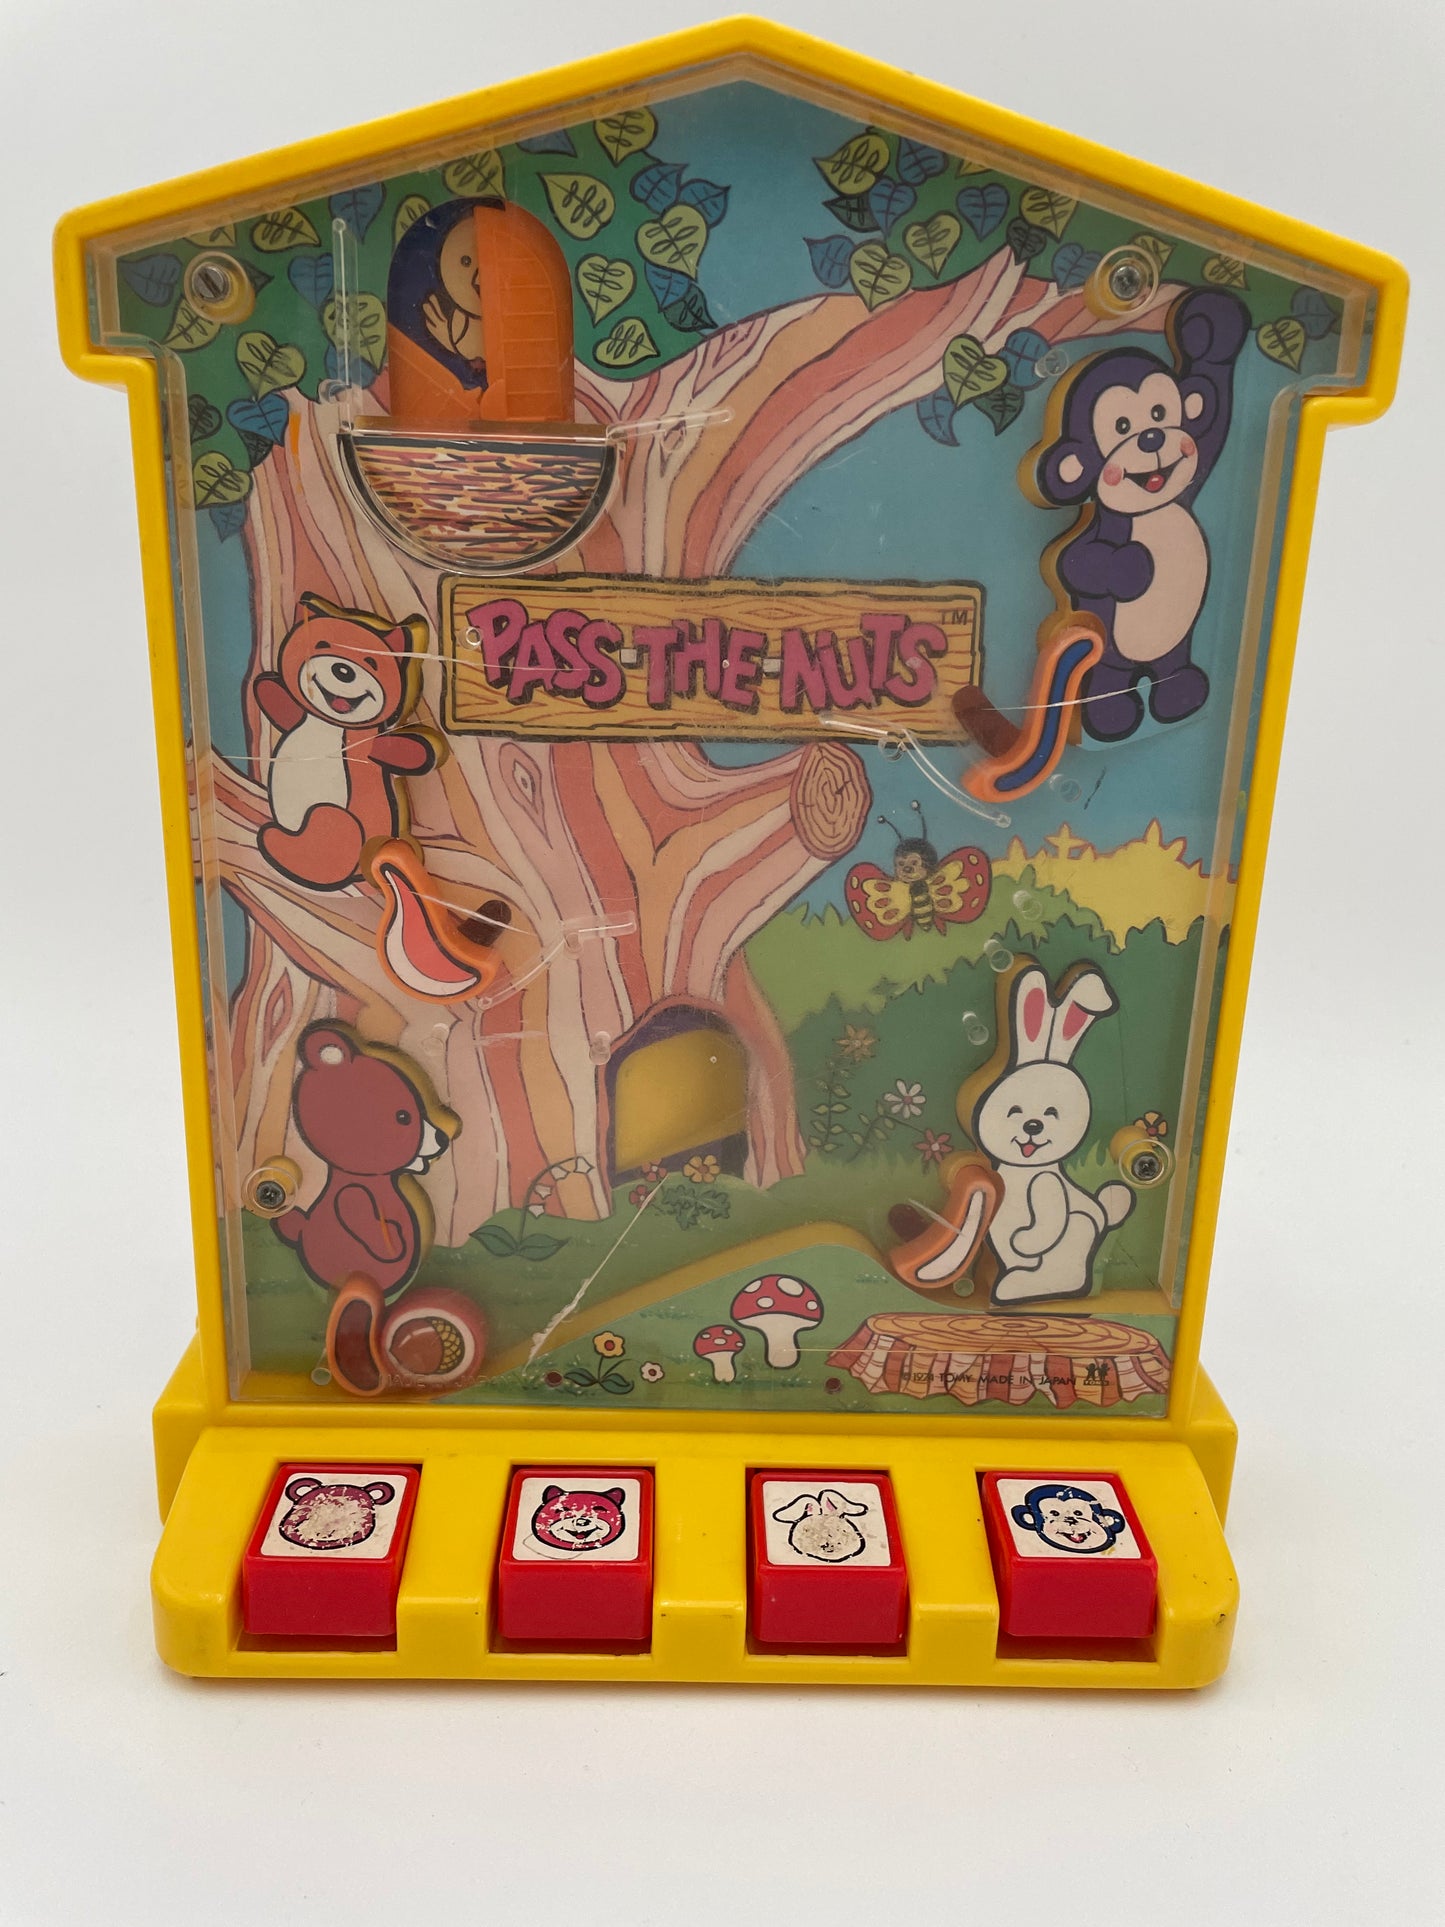 Pass the Nuts Vintage Flipper Game #101844